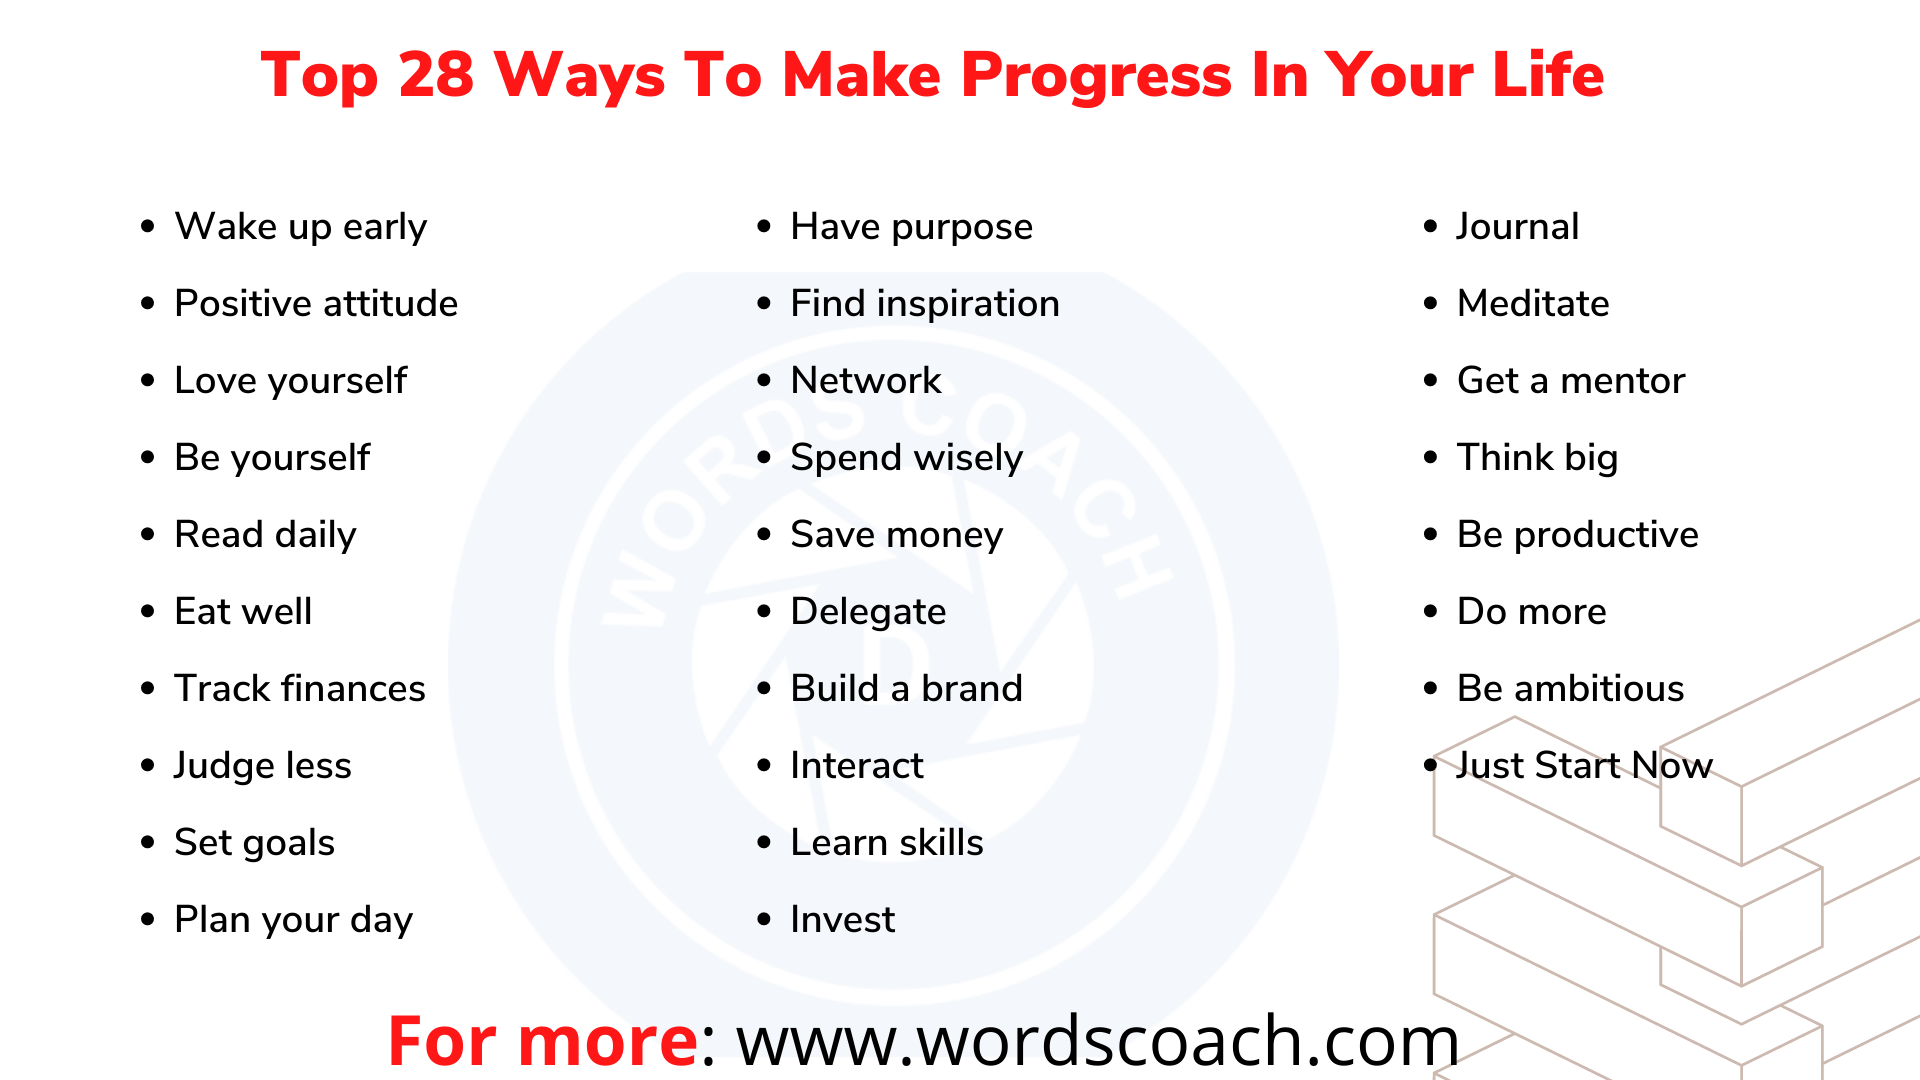 Top 28 Ways To Make Progress In Your Life